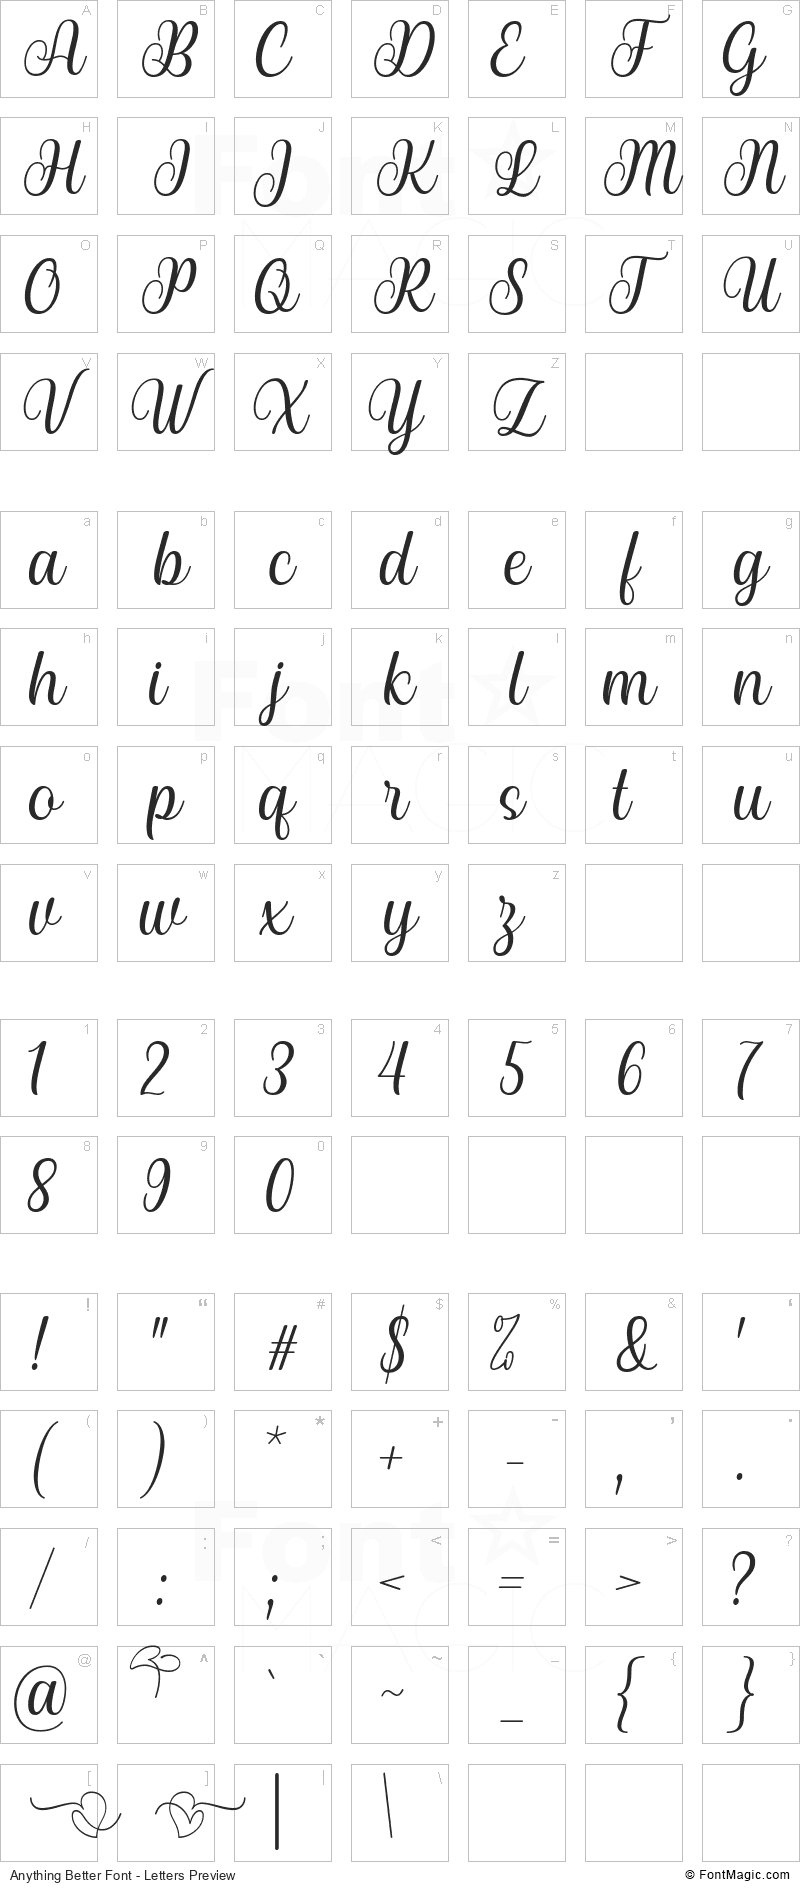 Anything Better Font - All Latters Preview Chart